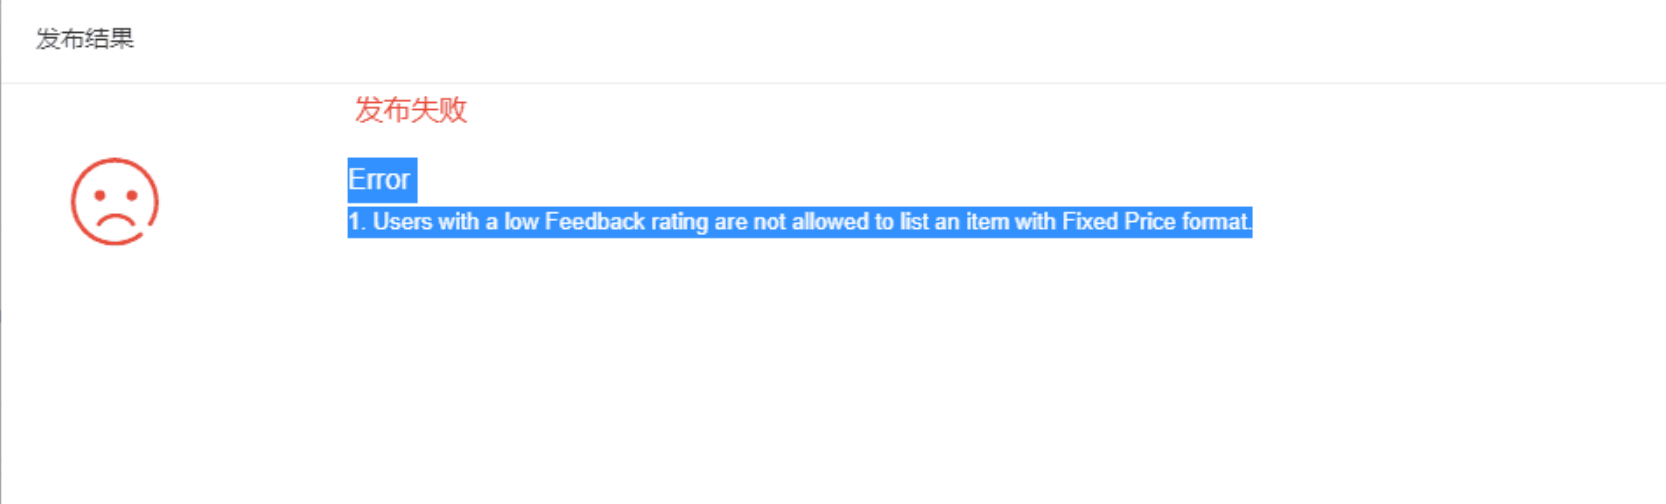 Users with a low Feedback rating are not allowed to list an item with Fixed Price format